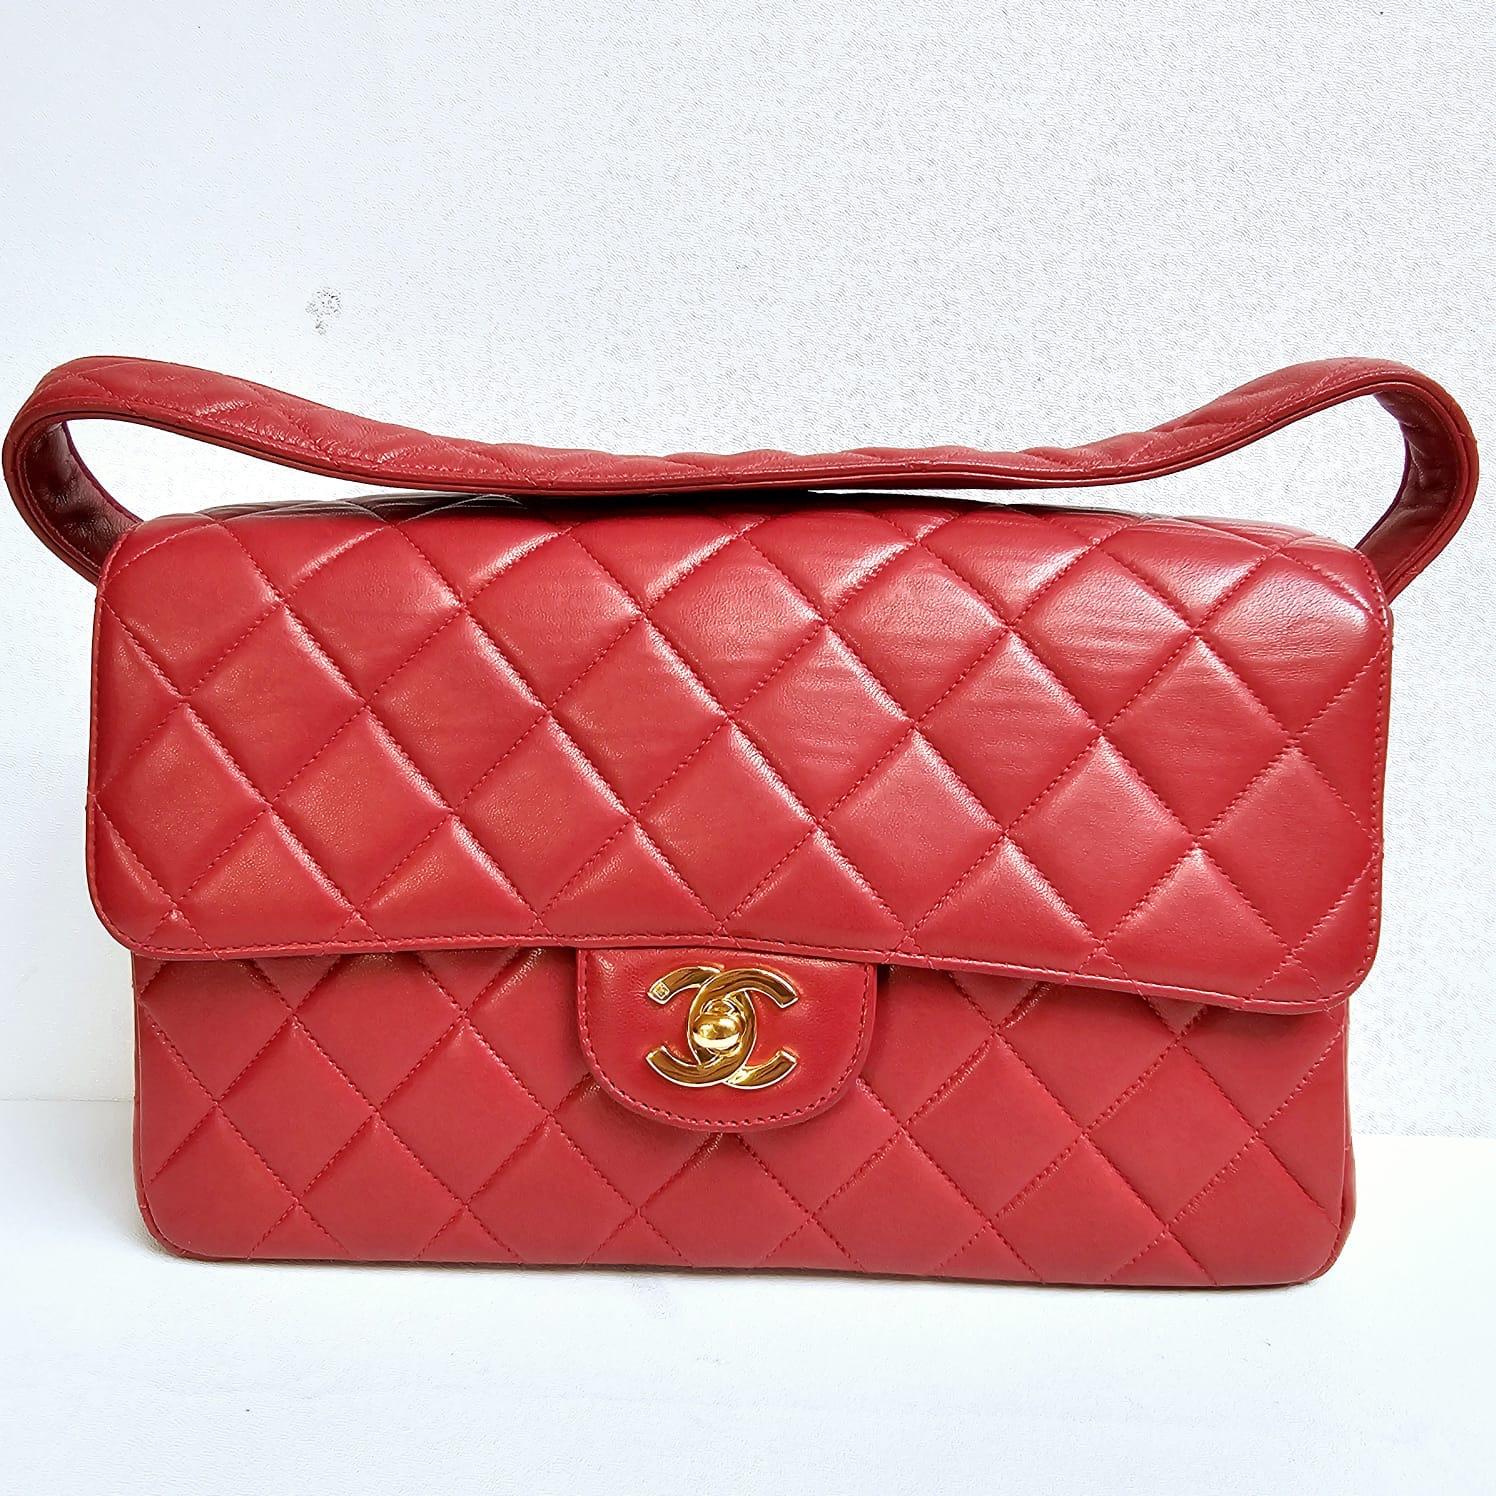 Chanel Vintage Red Lambskin Medium Quilted Double Face Top Handle Bag For Sale 9